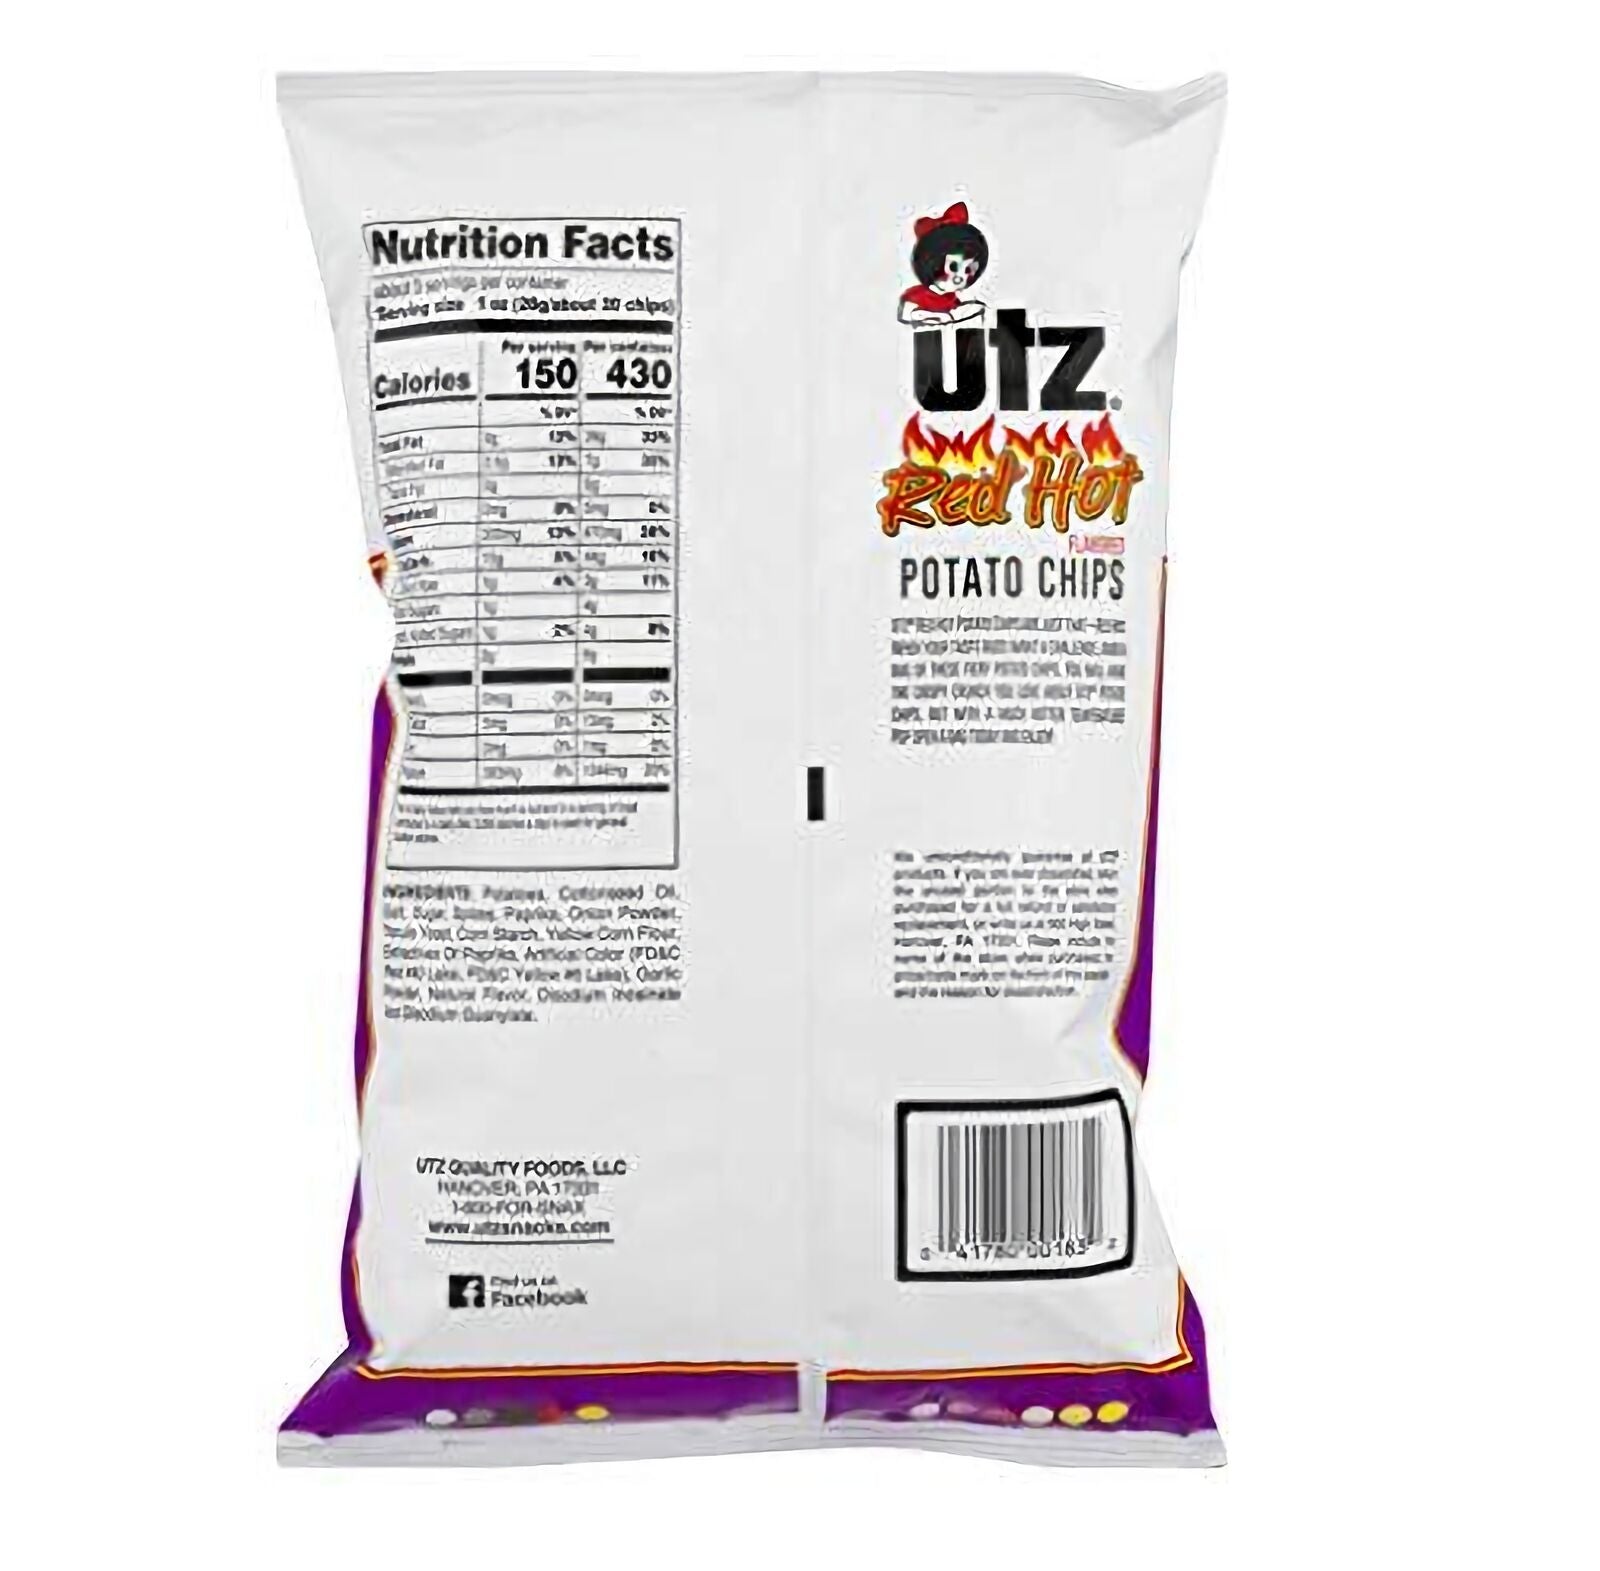 UTZ Red Hot Potato Chips 2.875 Oz Bags - Pack of 7